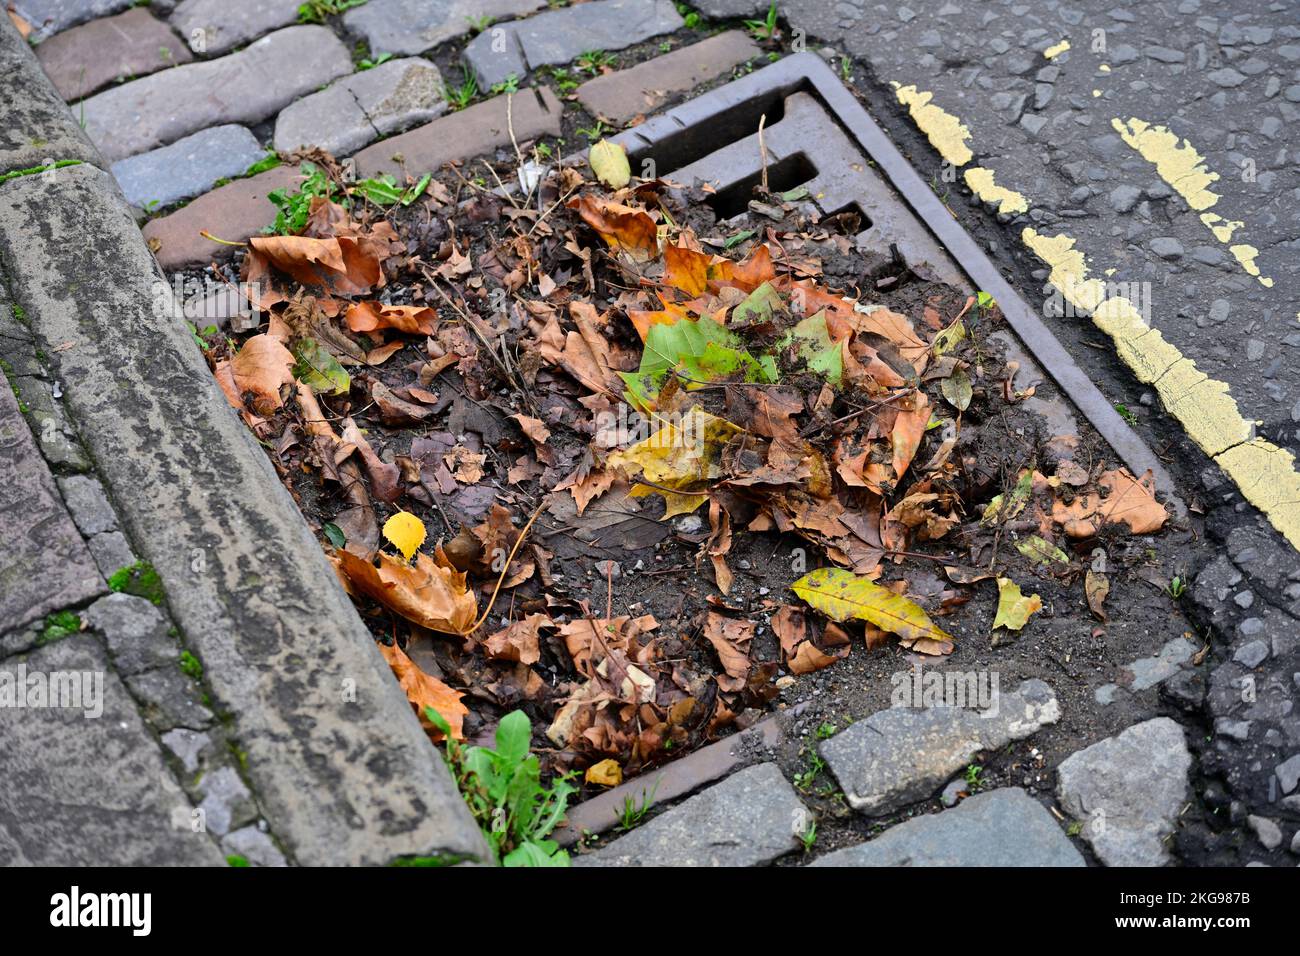 Fall, autumn fallen leaves washed along roadside gutter to be blocked by car wheel. Leaves not swept up blocking gutter Stock Photo